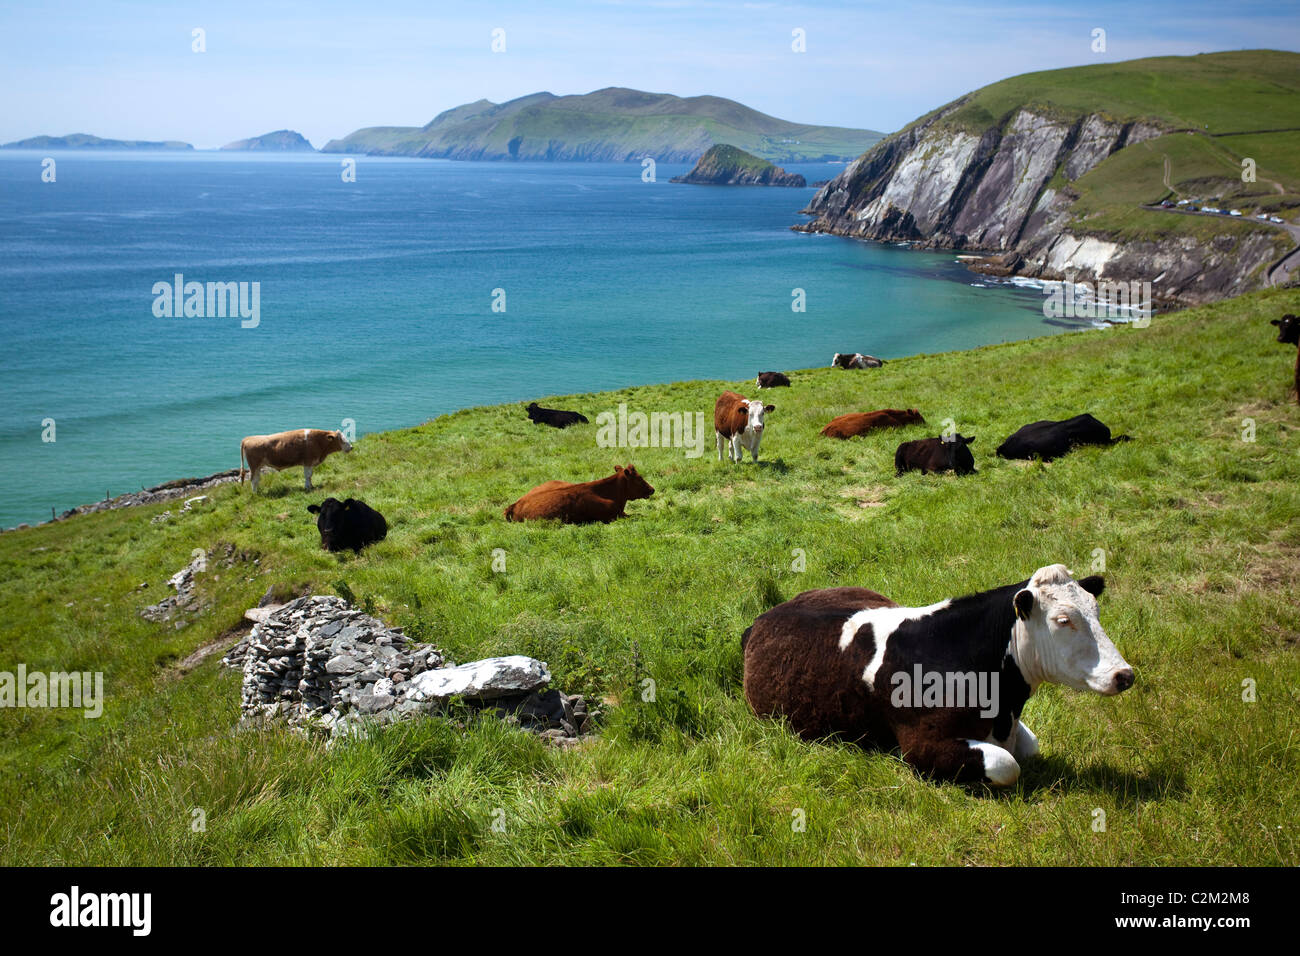 Cows resting above Coumeenoole Bay, Dingle Peninsula, County Kerry, Ireland. Stock Photo